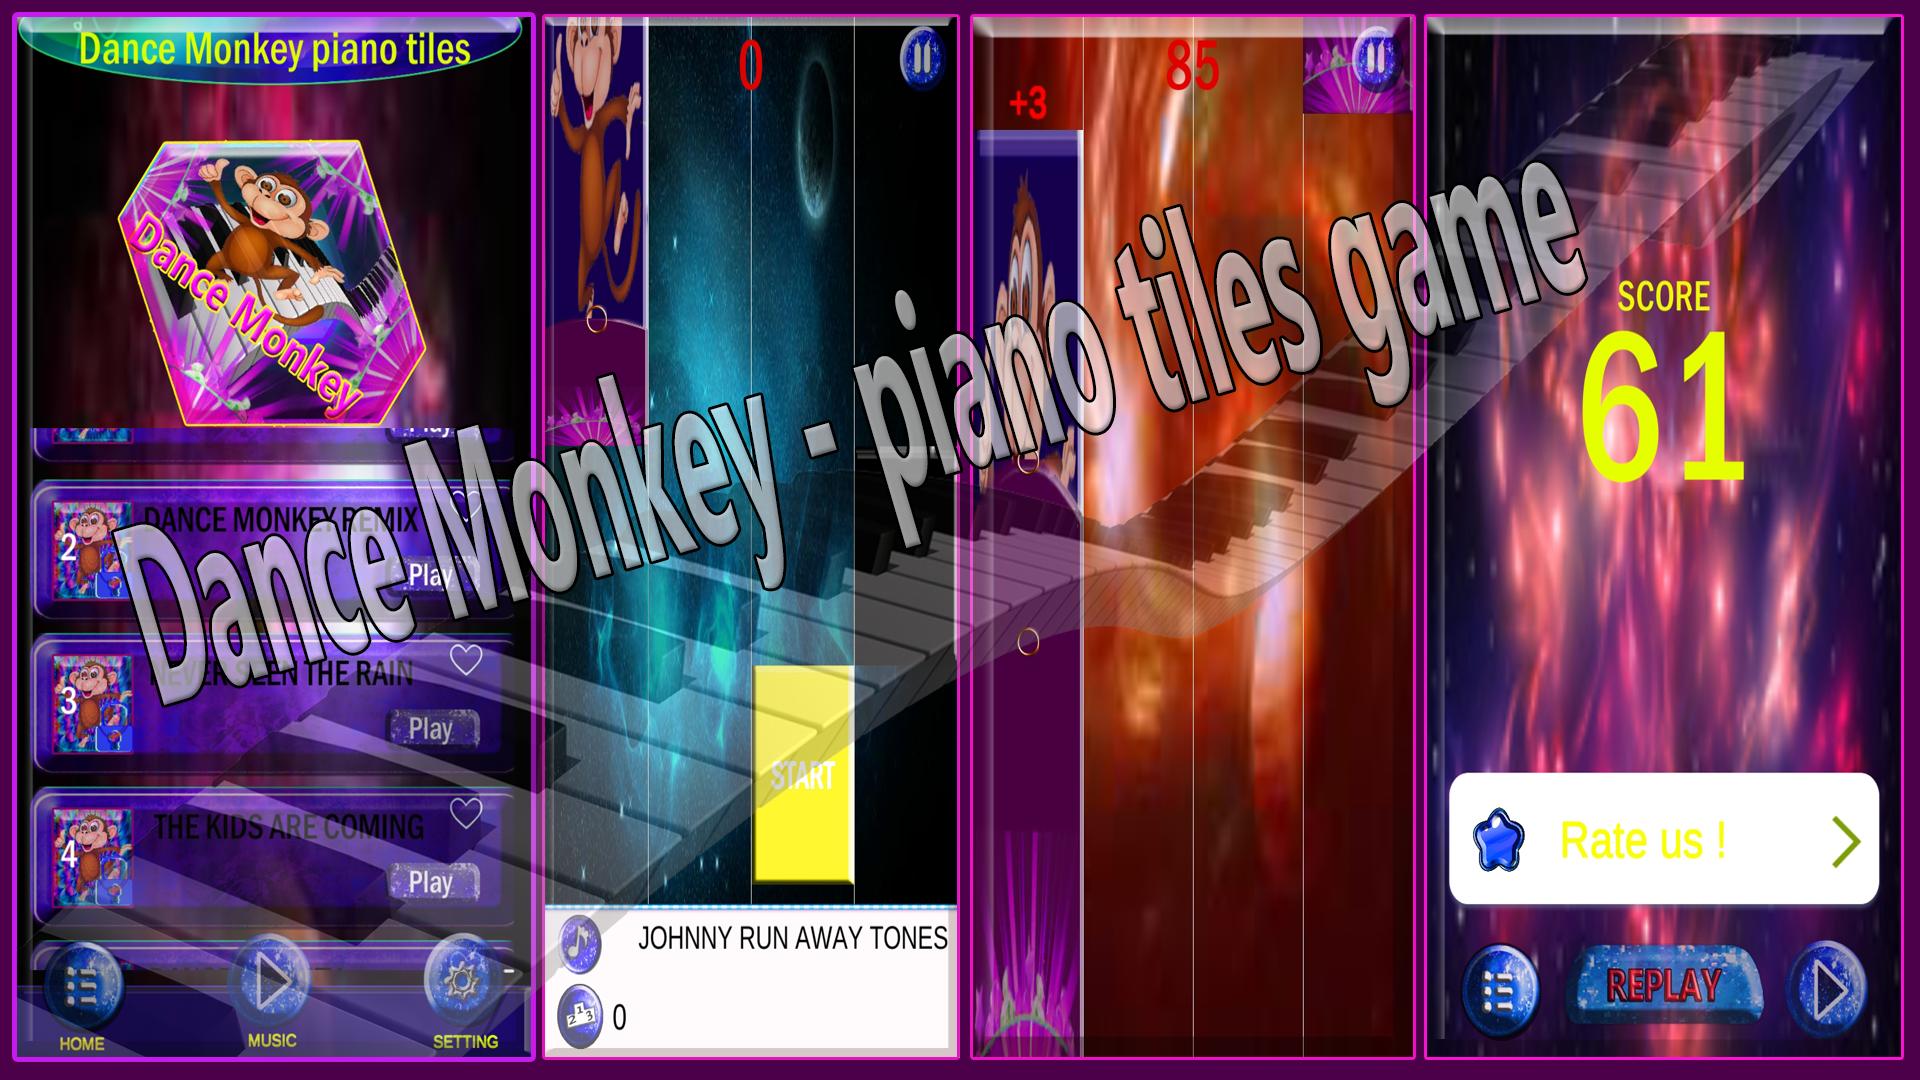 Dance Monkey Piano Tiles Game For Android Apk Download